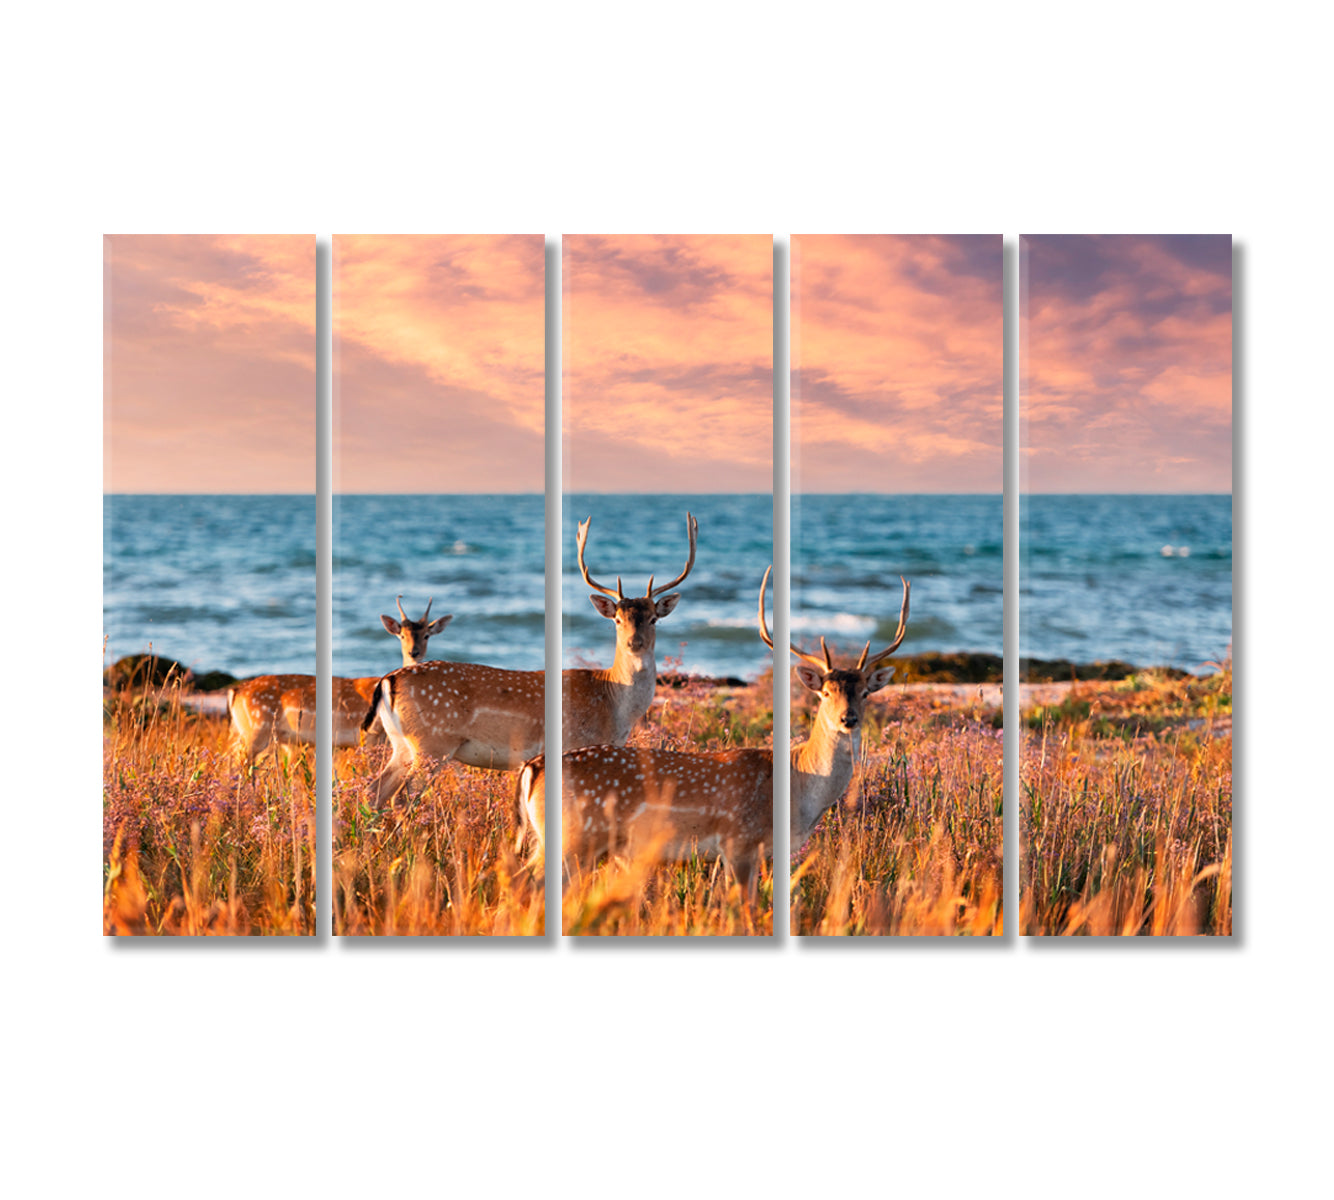 Sea Landscape with Sika Deer Family Canvas Print-Canvas Print-CetArt-5 Panels-36x24 inches-CetArt